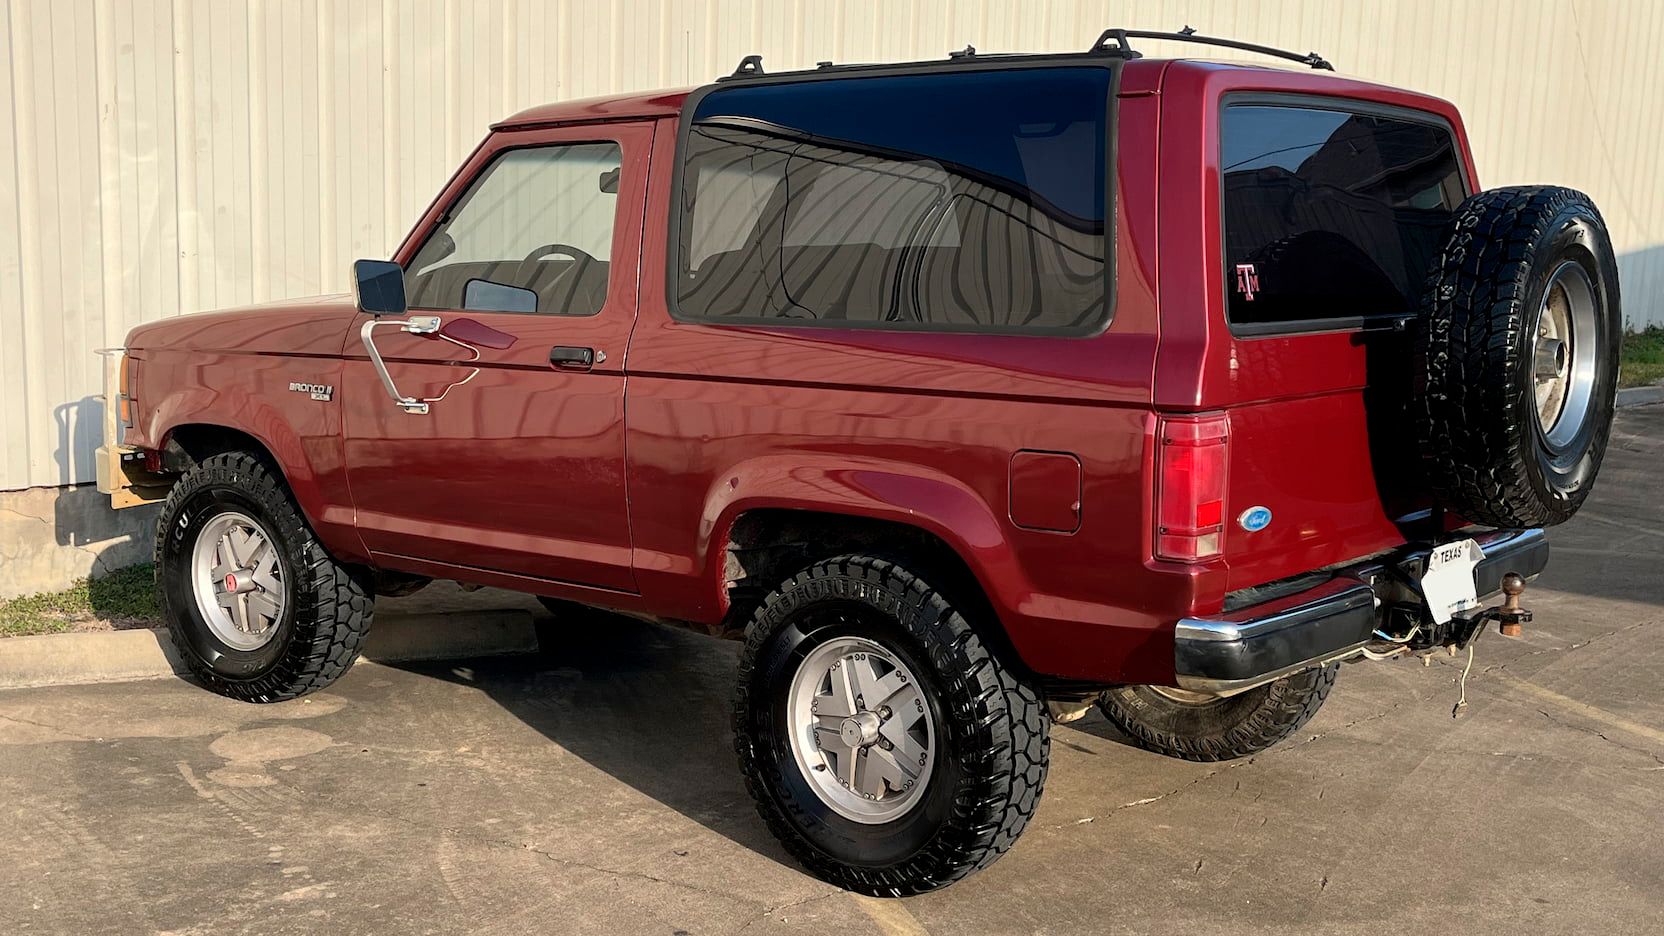 A Parked 1990 Ford Bronco II